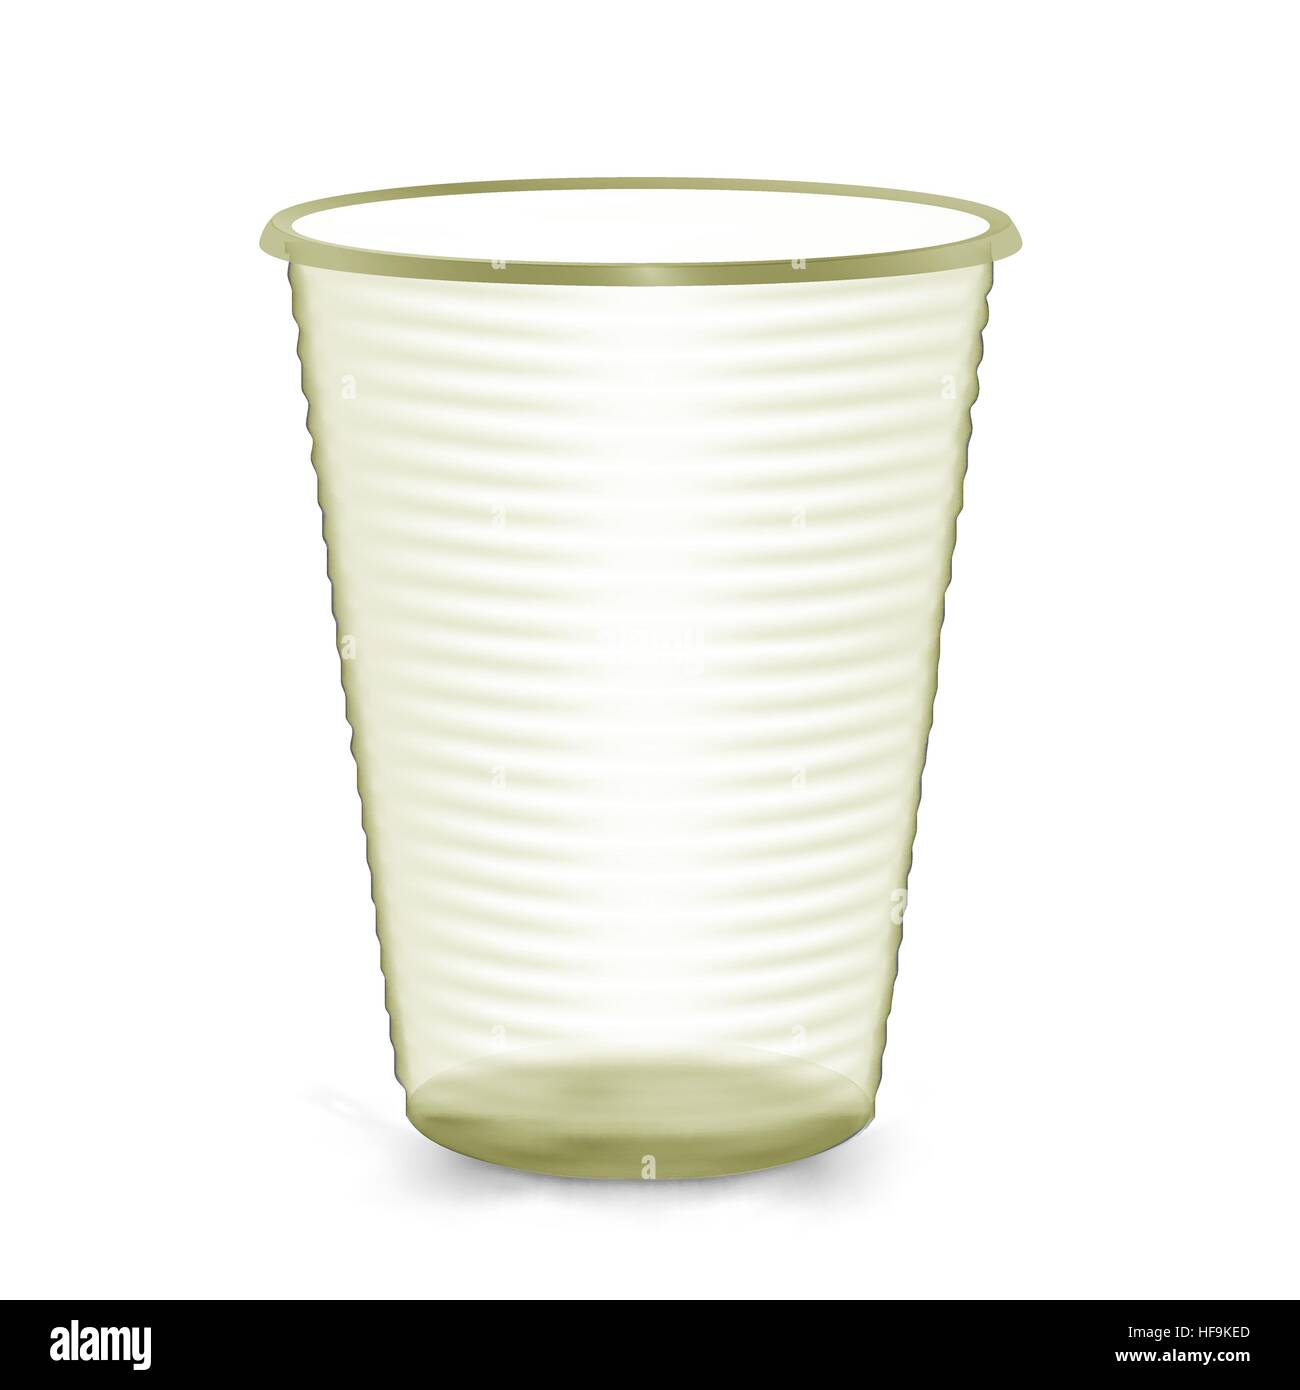 https://c8.alamy.com/comp/HF9KED/plastic-cup-yellow-colour-isolated-on-white-background-mock-up-for-HF9KED.jpg